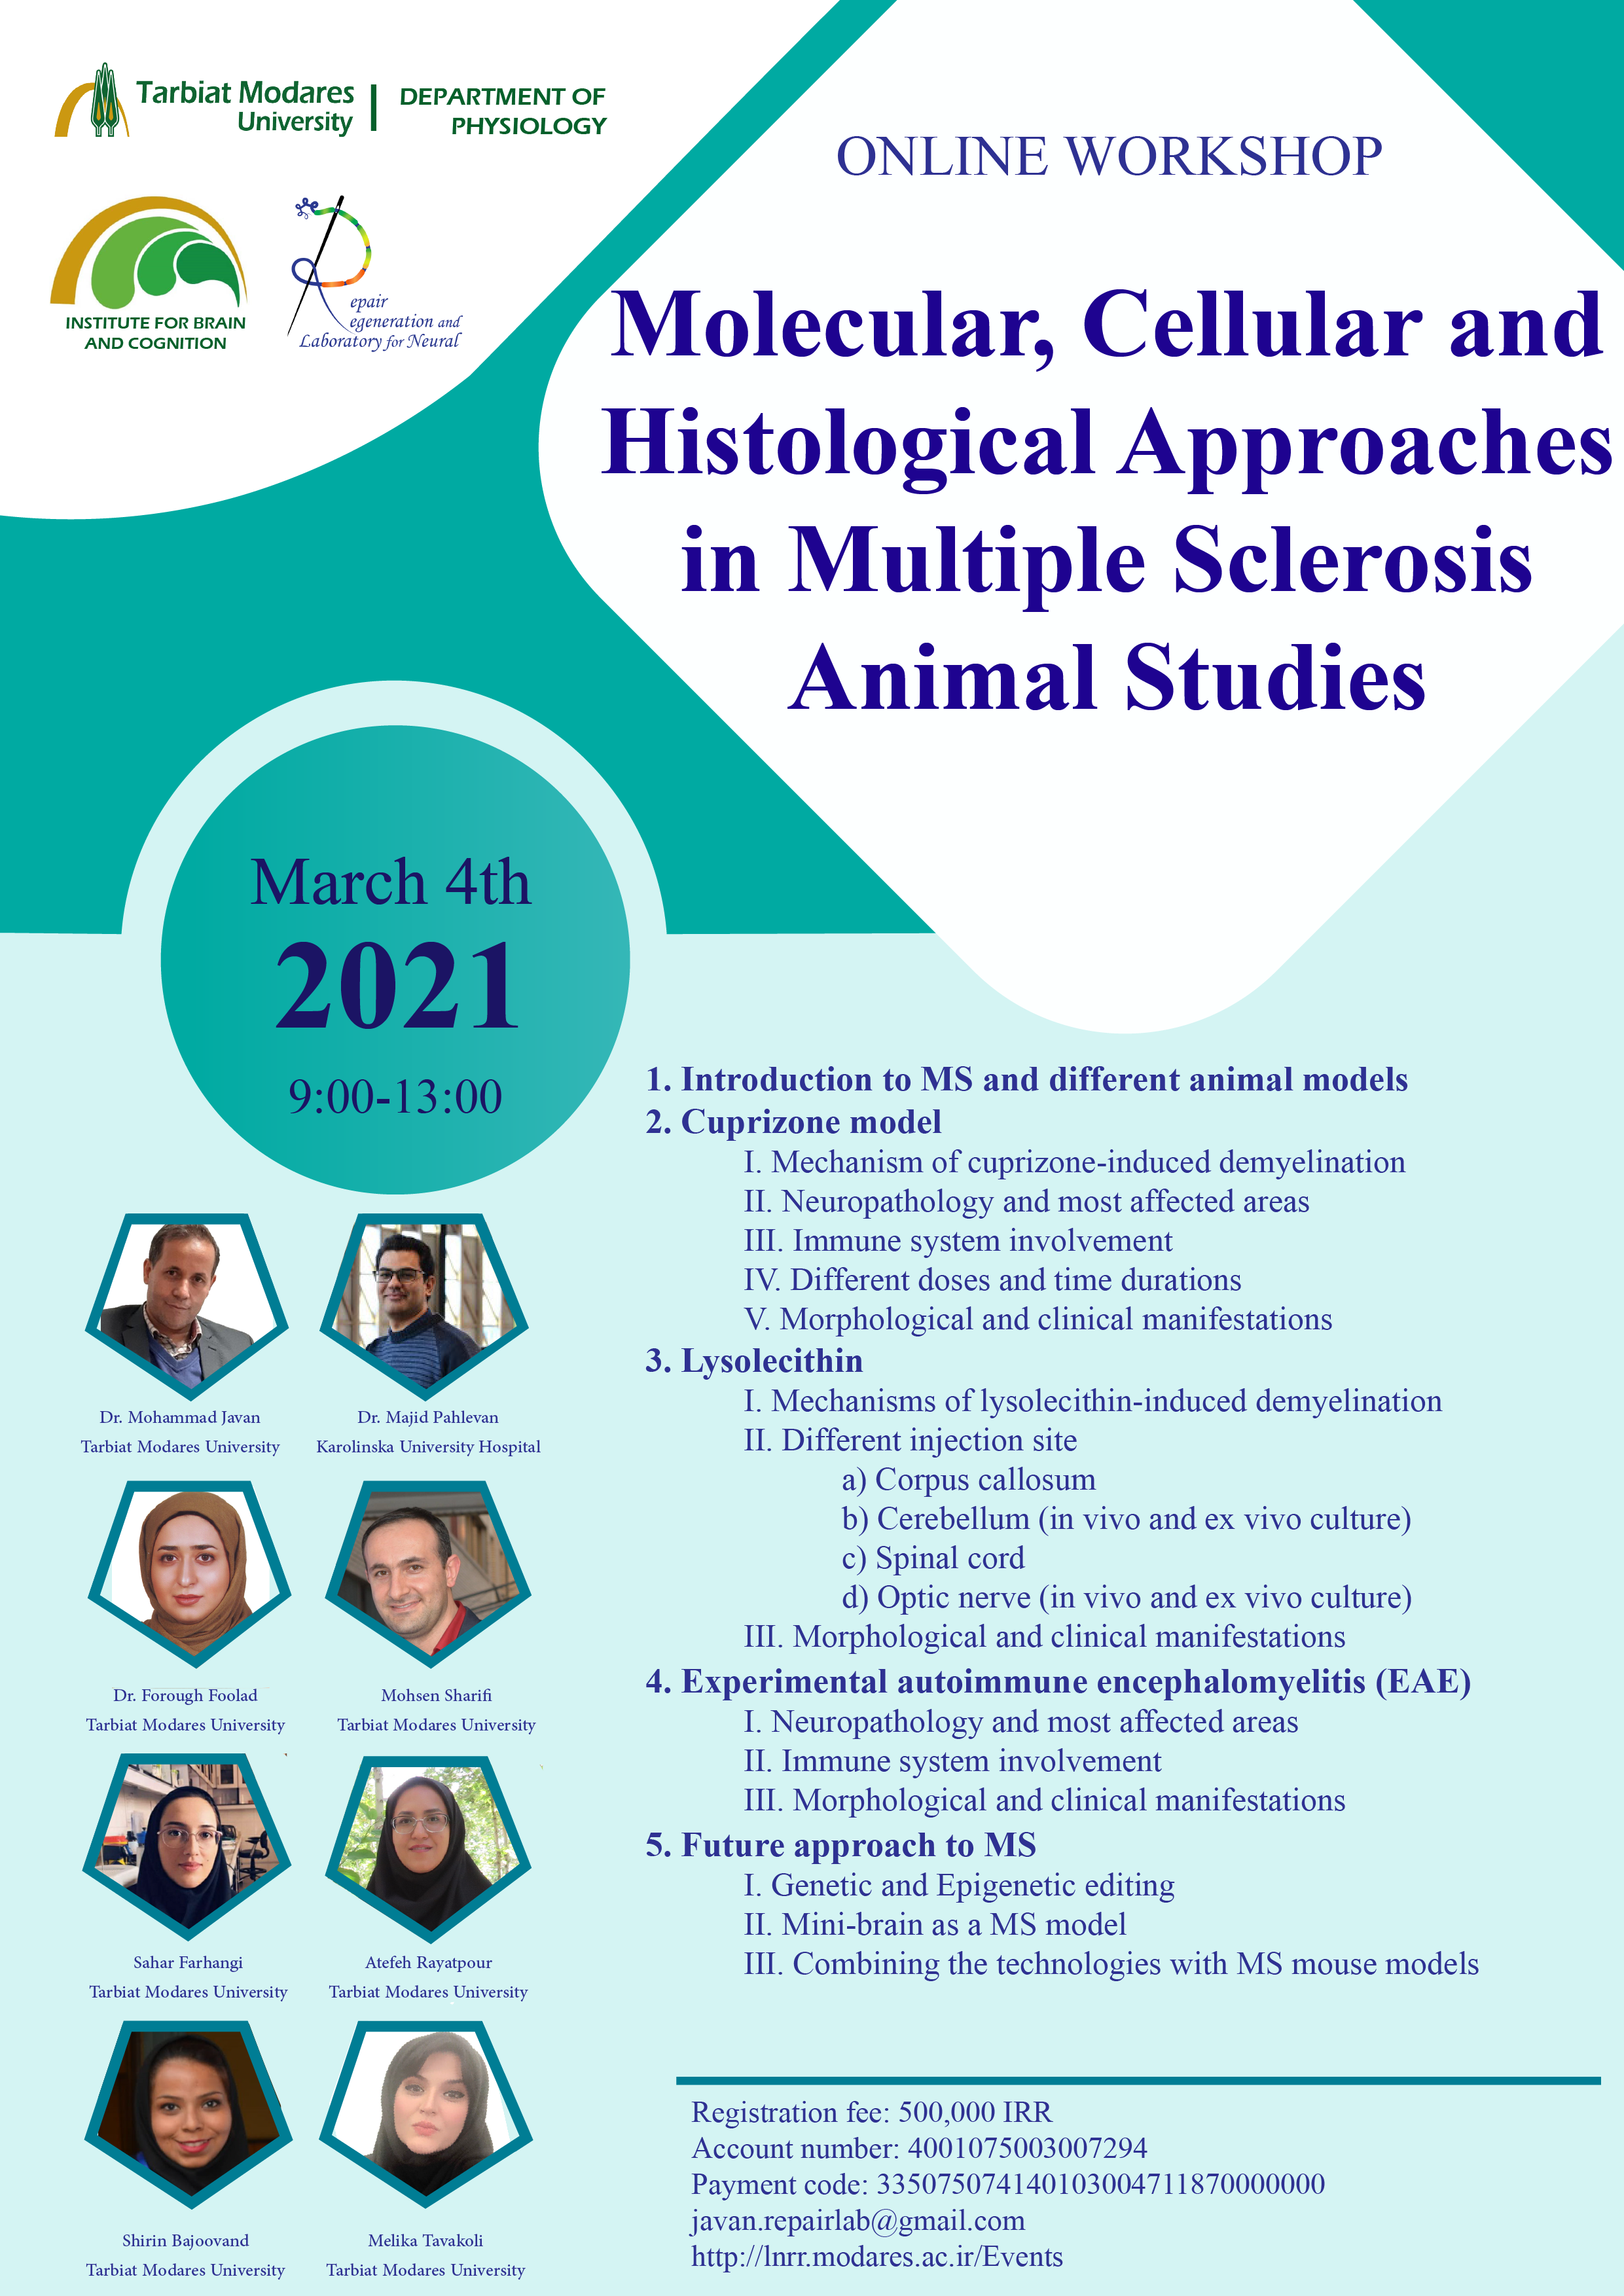 Molecular, Cellular and Histological Approaches in Multiple Sclerosis Animal Studies